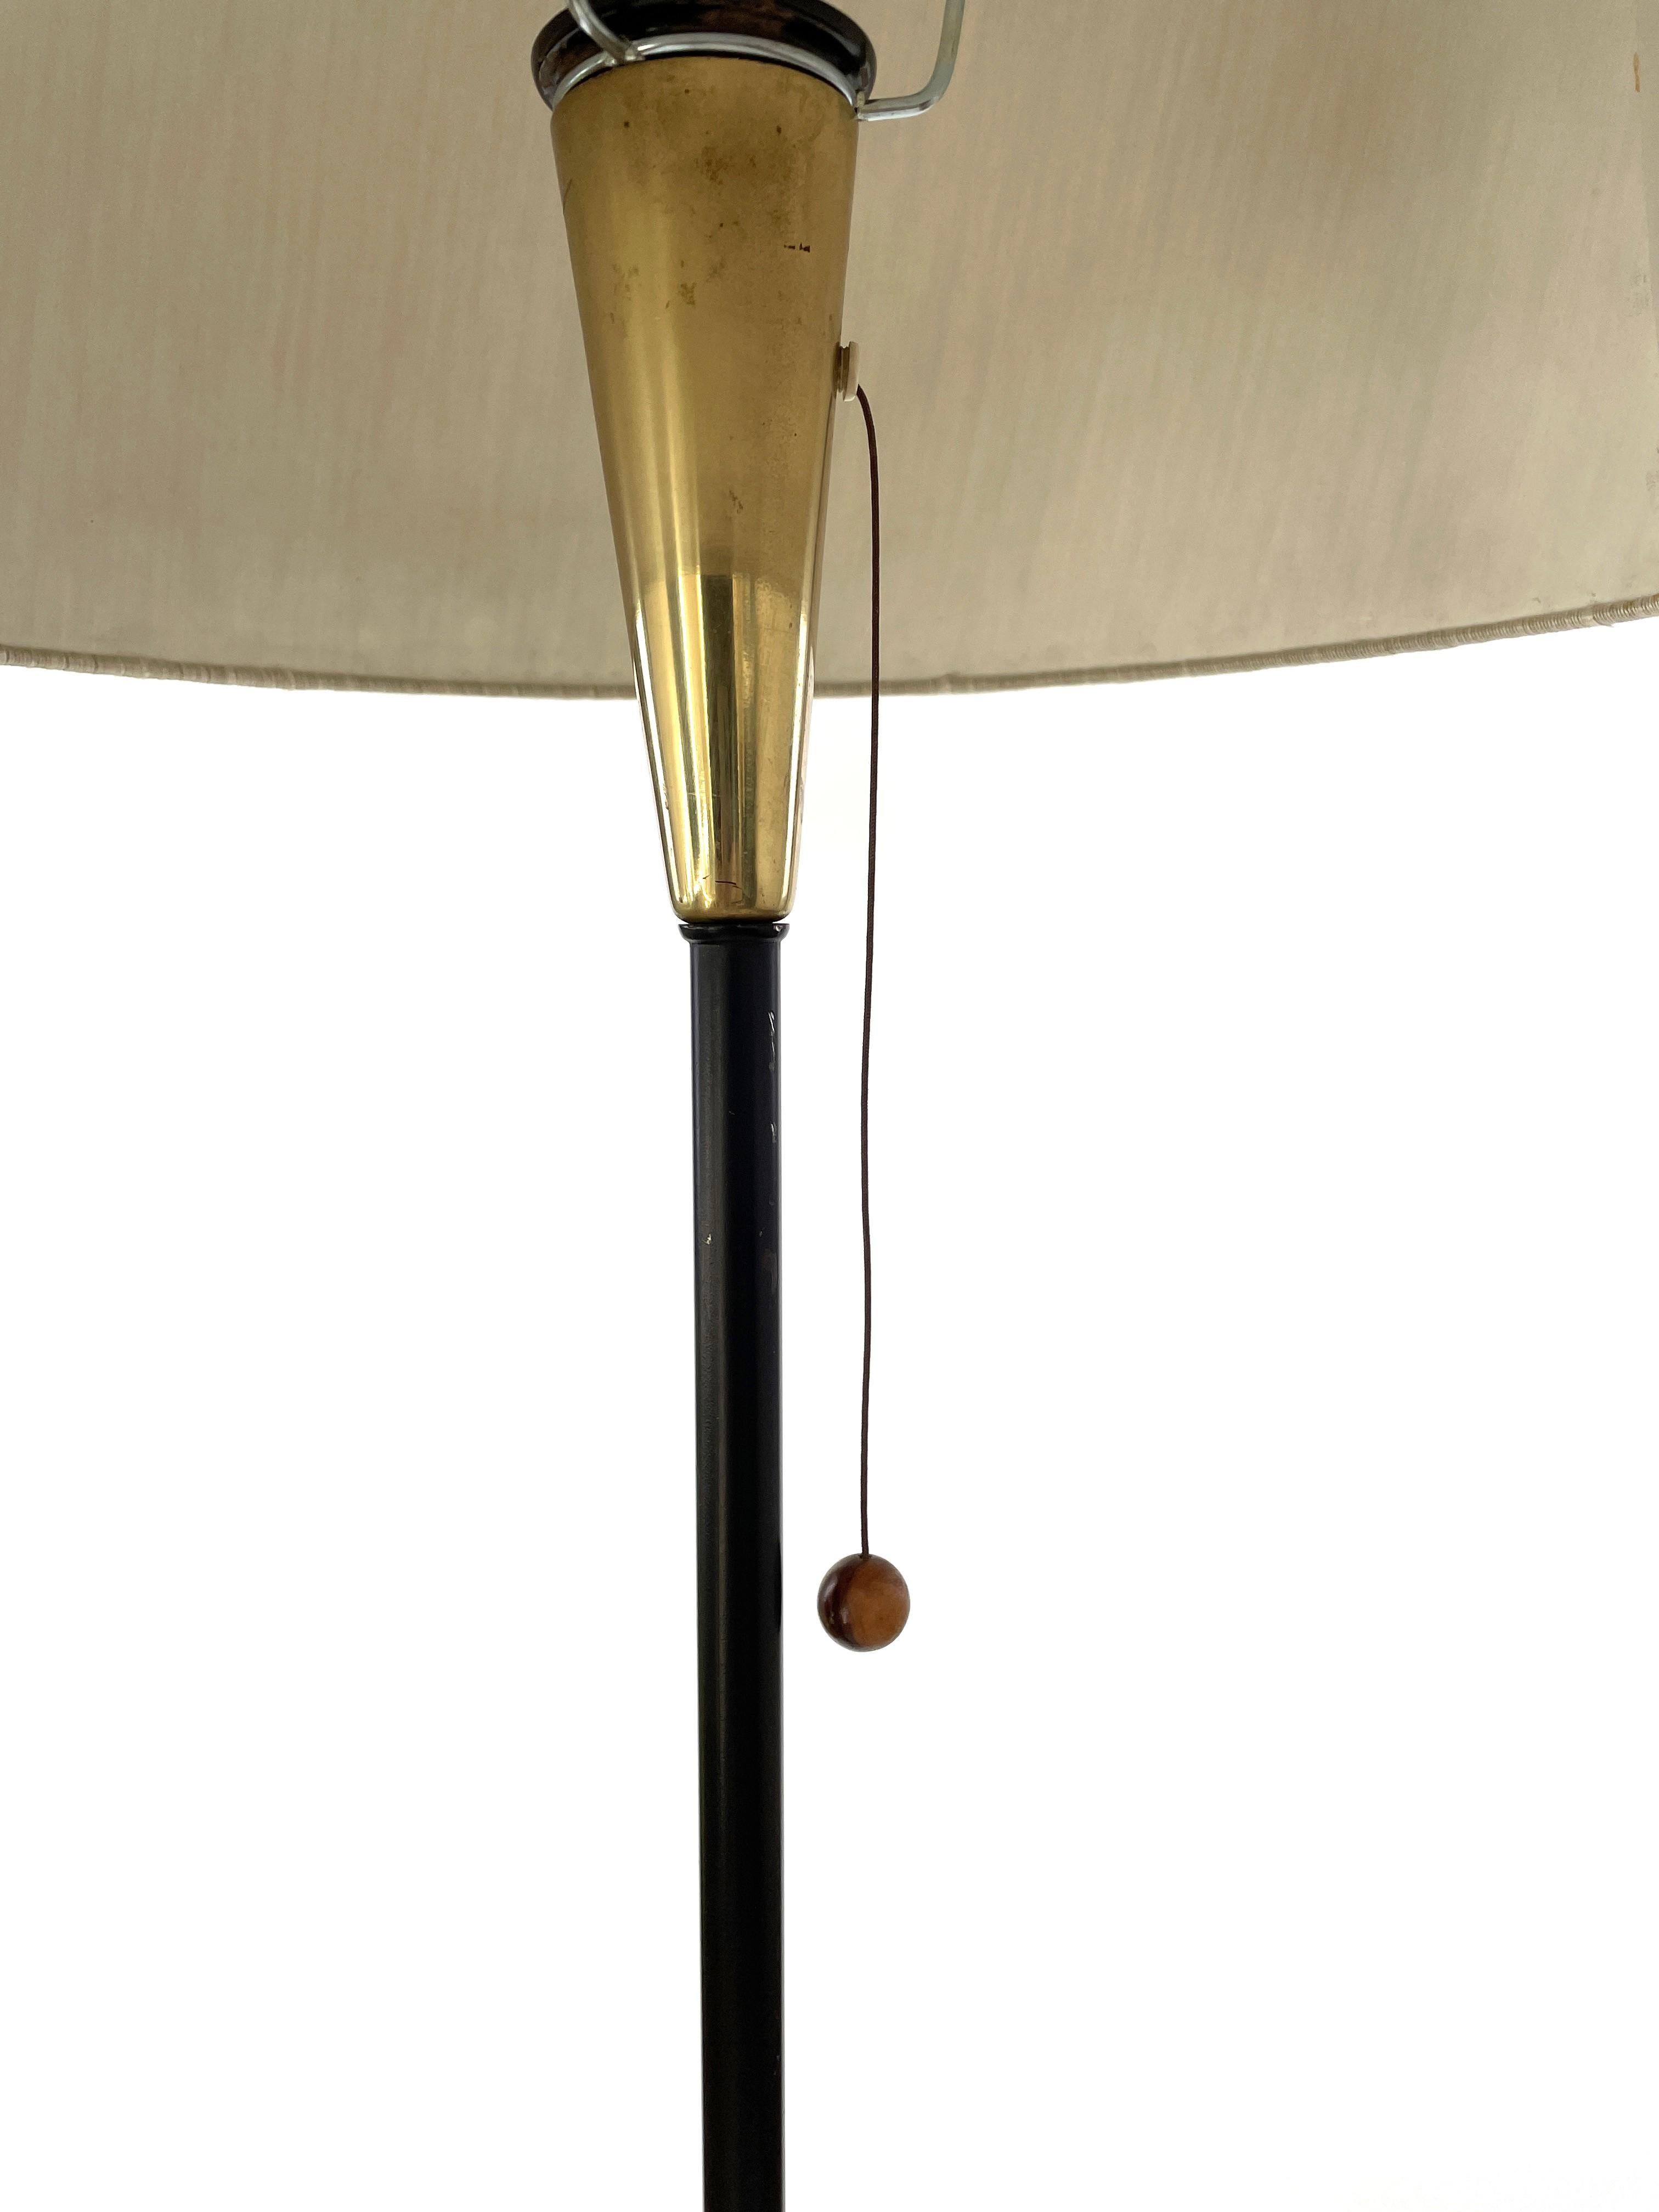 Mid-20th Century Mid-century Modern Floor Lamp by Maria Lindeman for Idman, Finland, 1950s For Sale